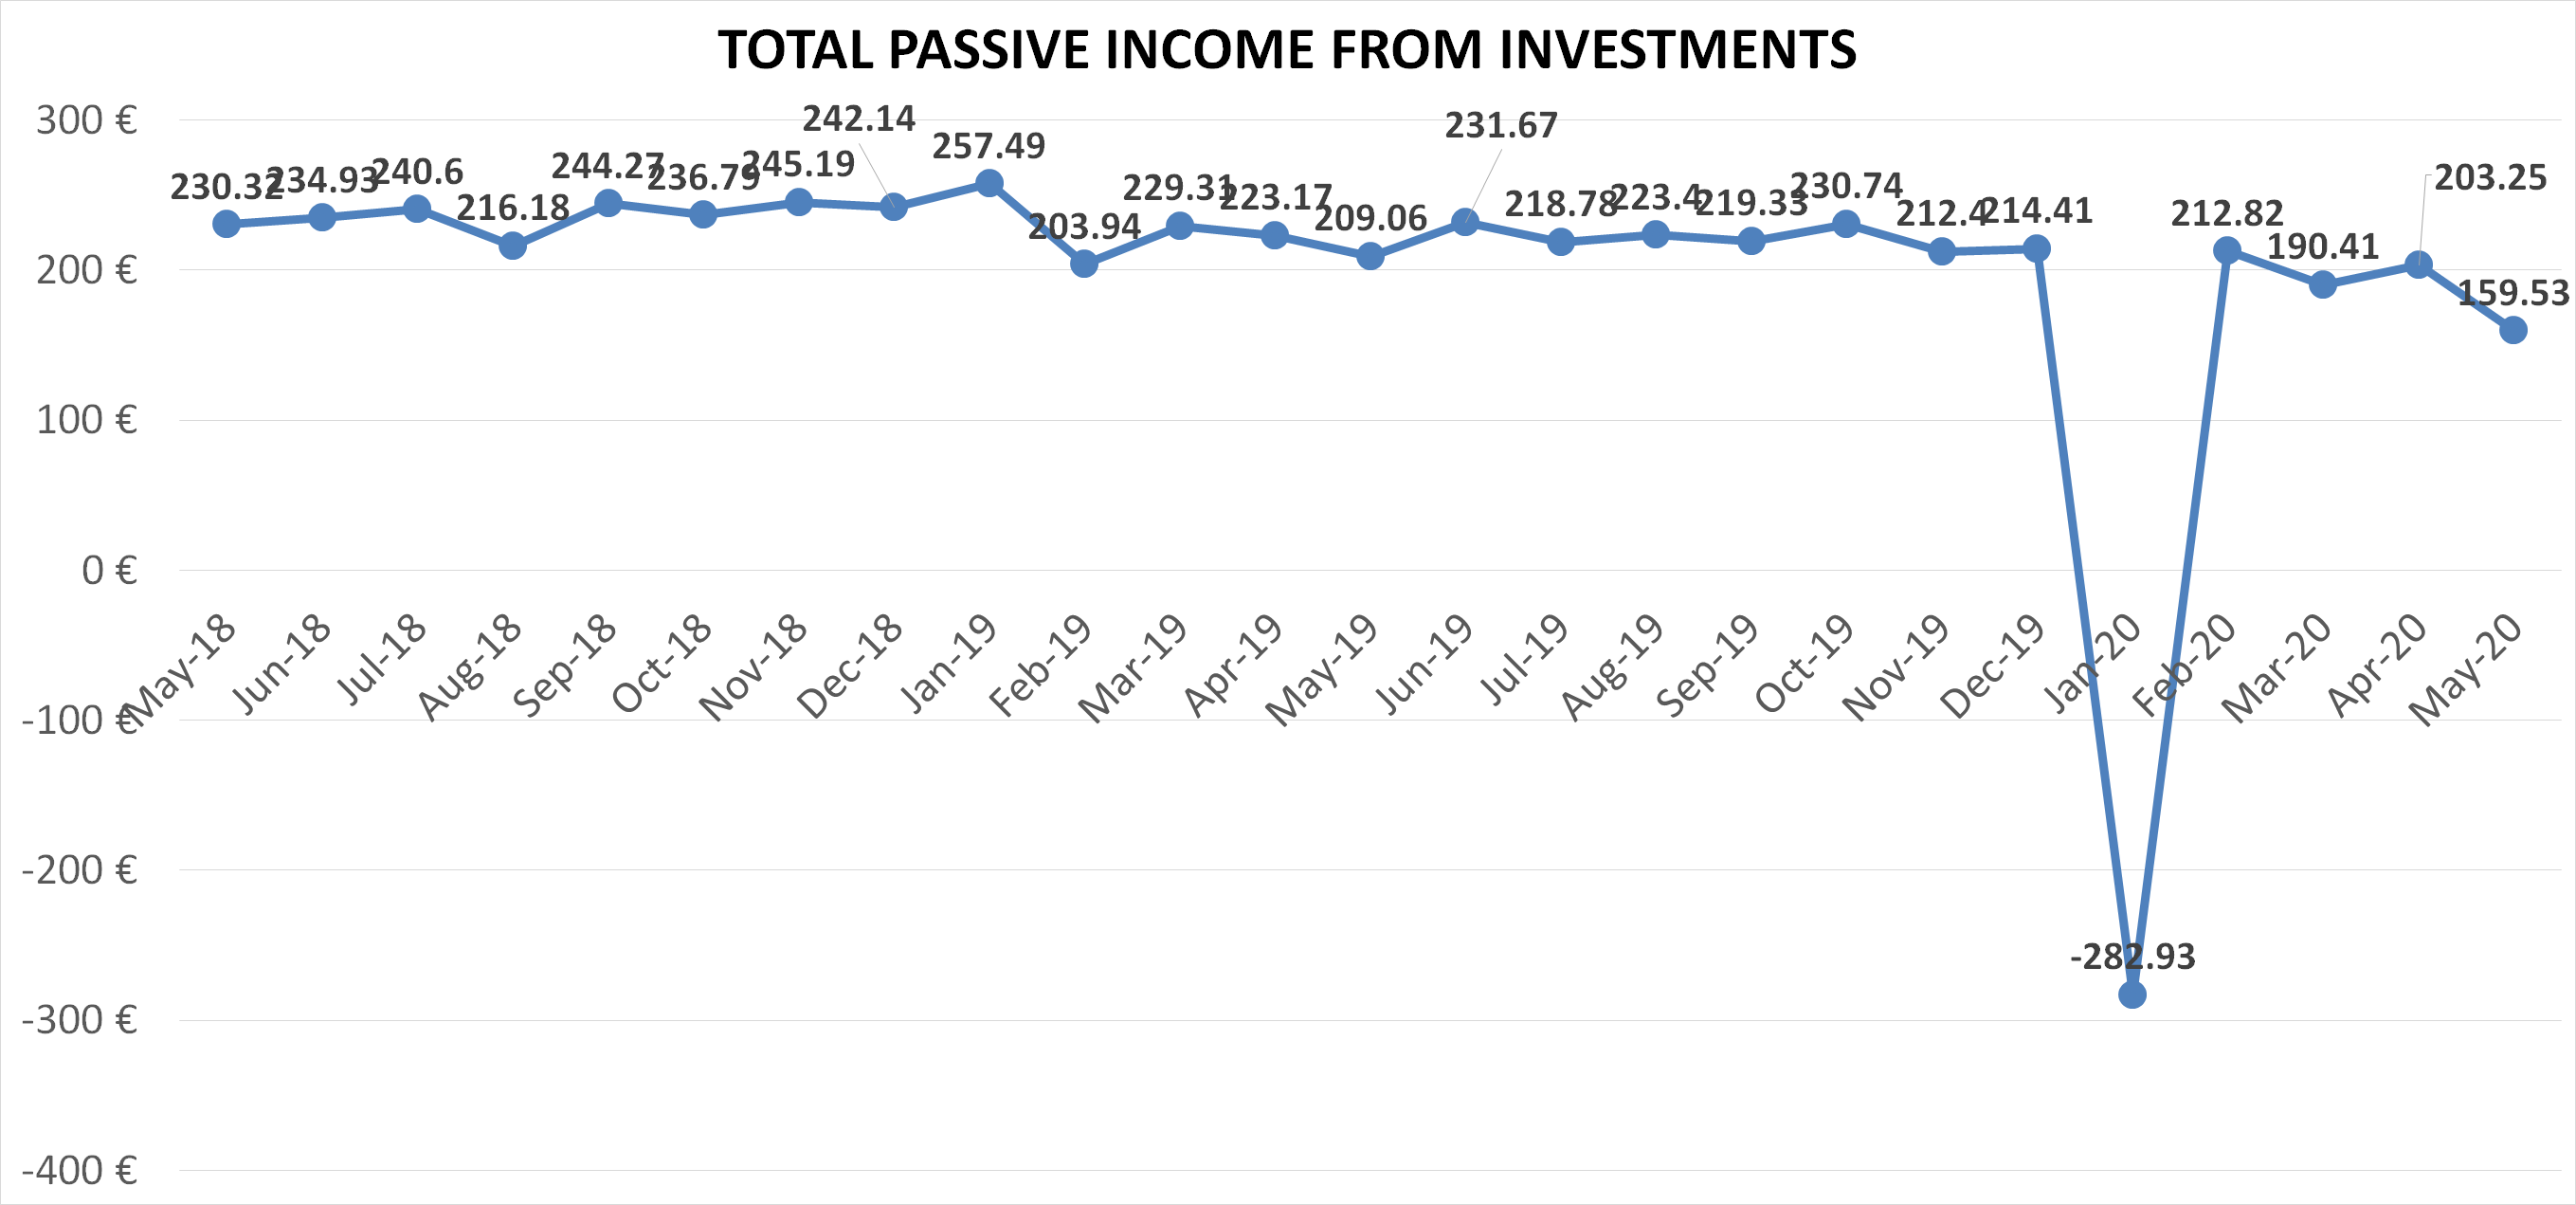 Total passive income from investments may 2020